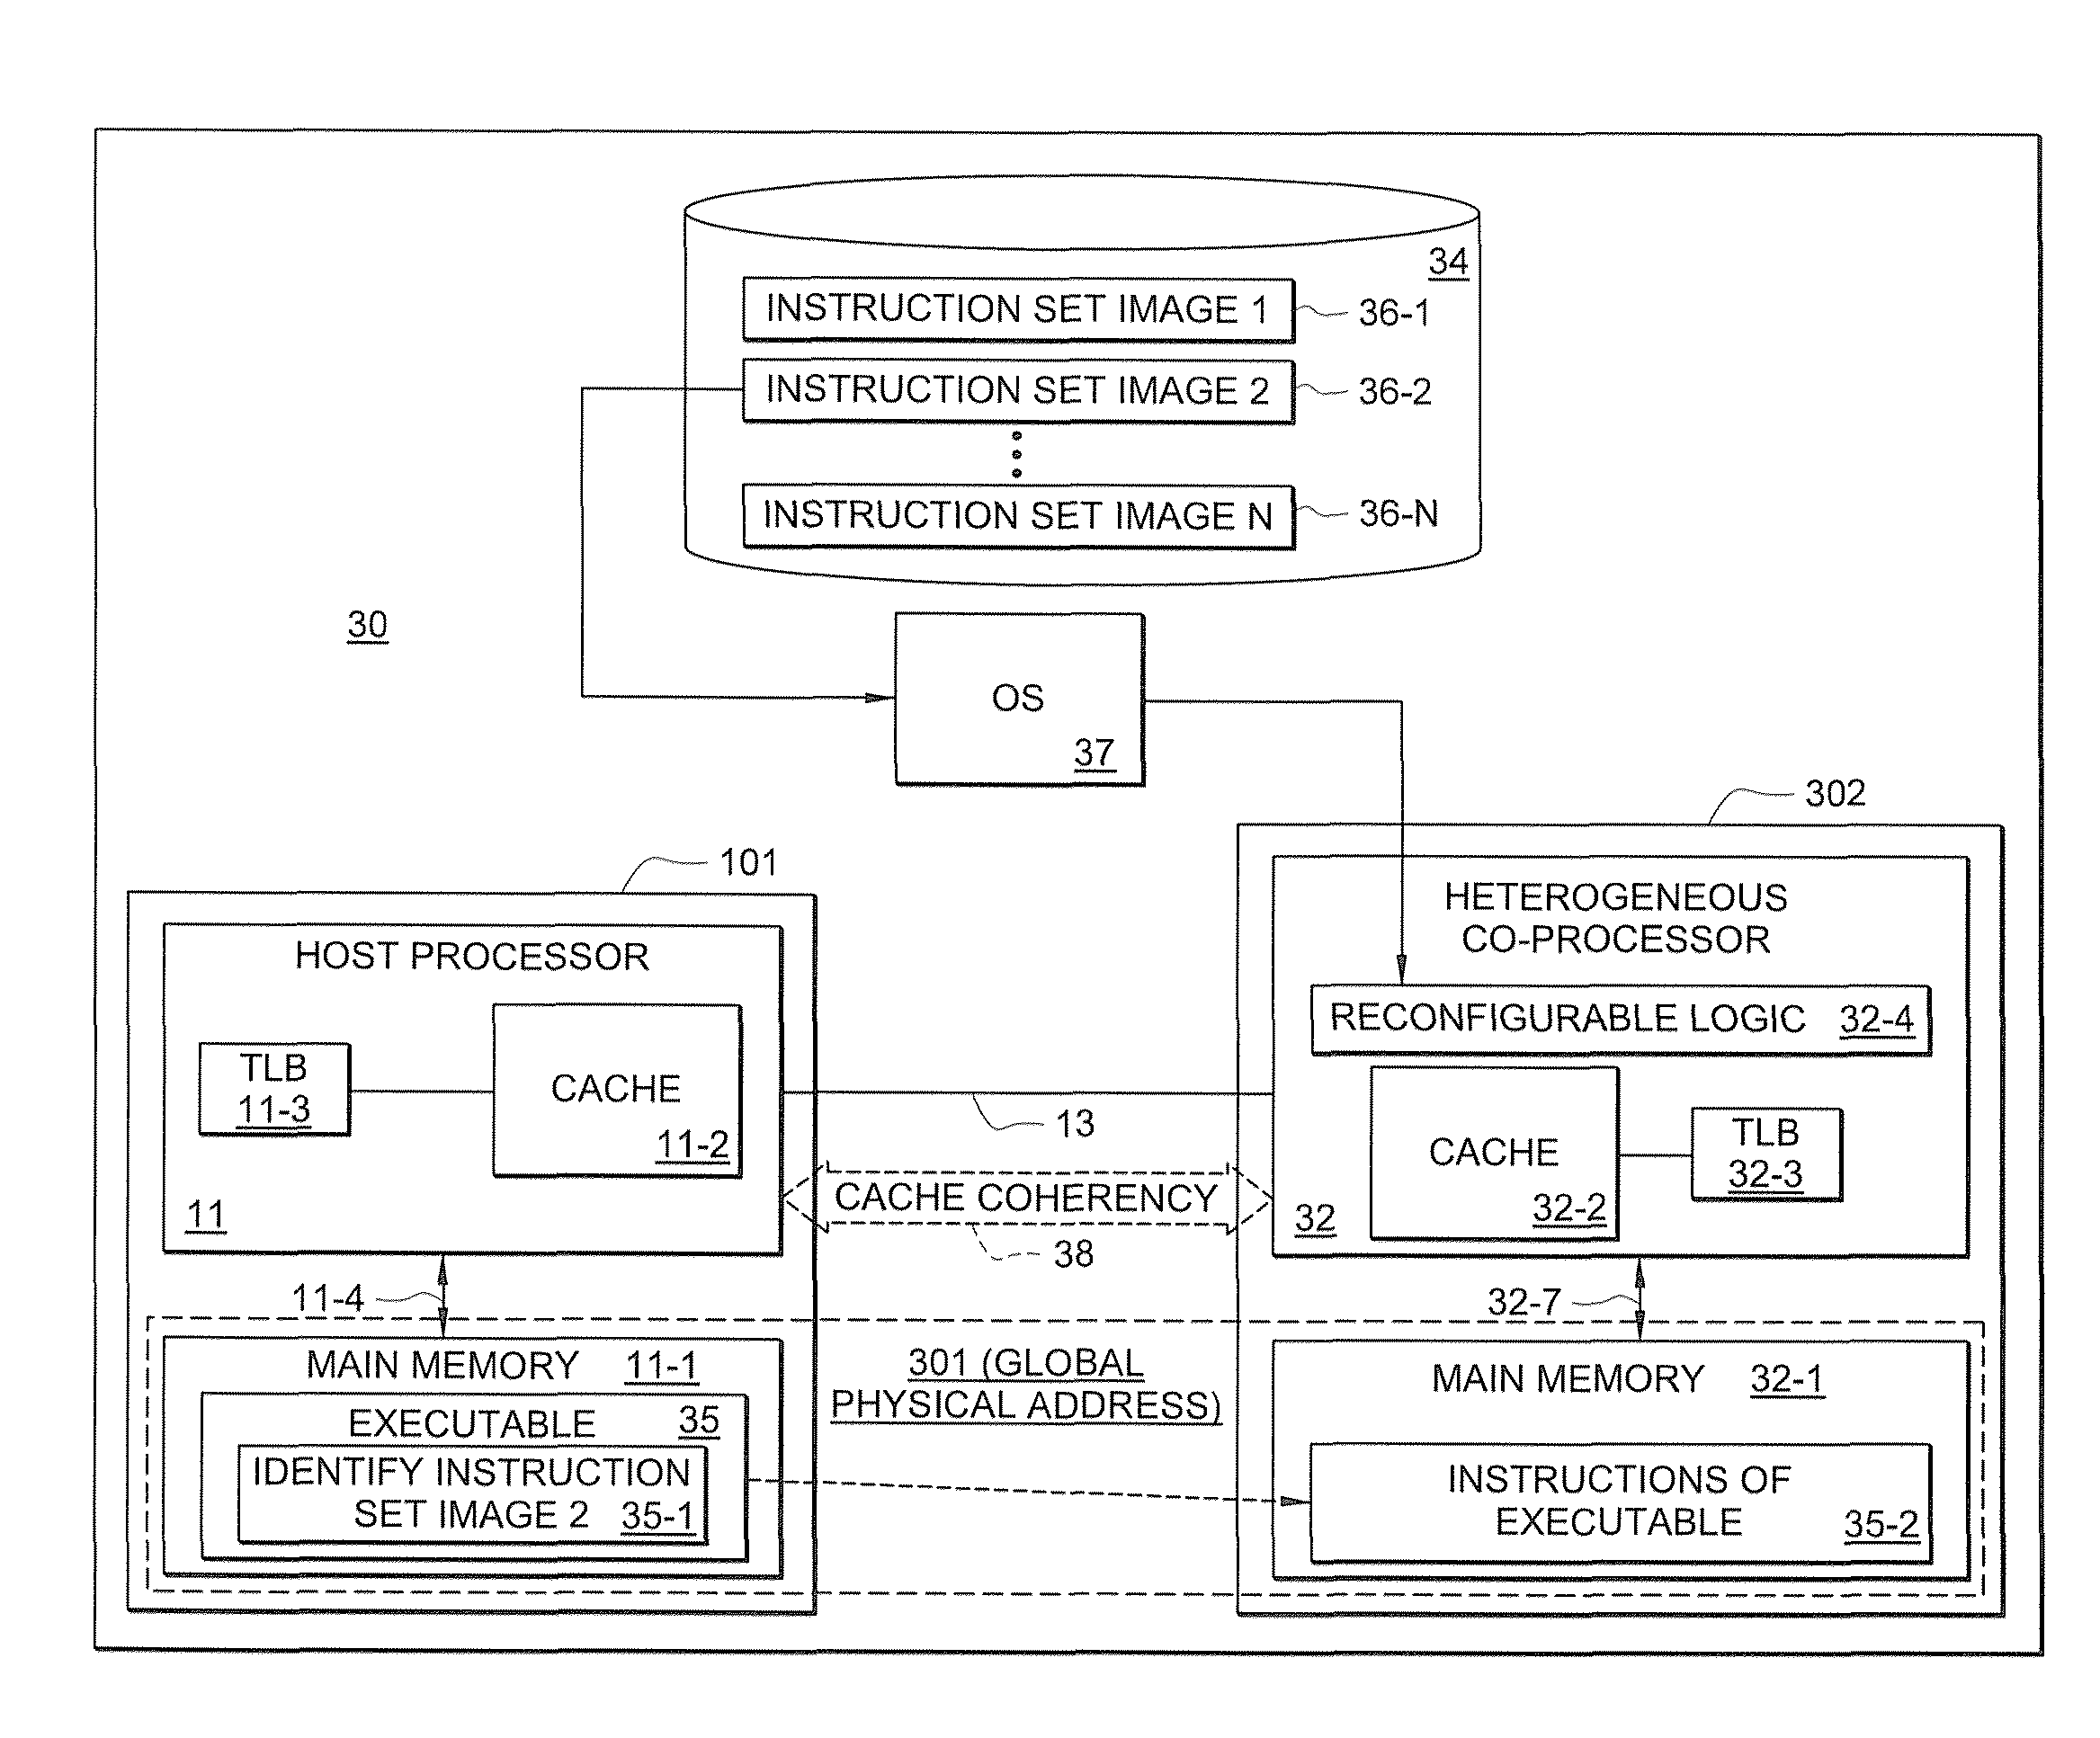 Dispatch mechanism for dispatching instructions from a host processor to a co-processor